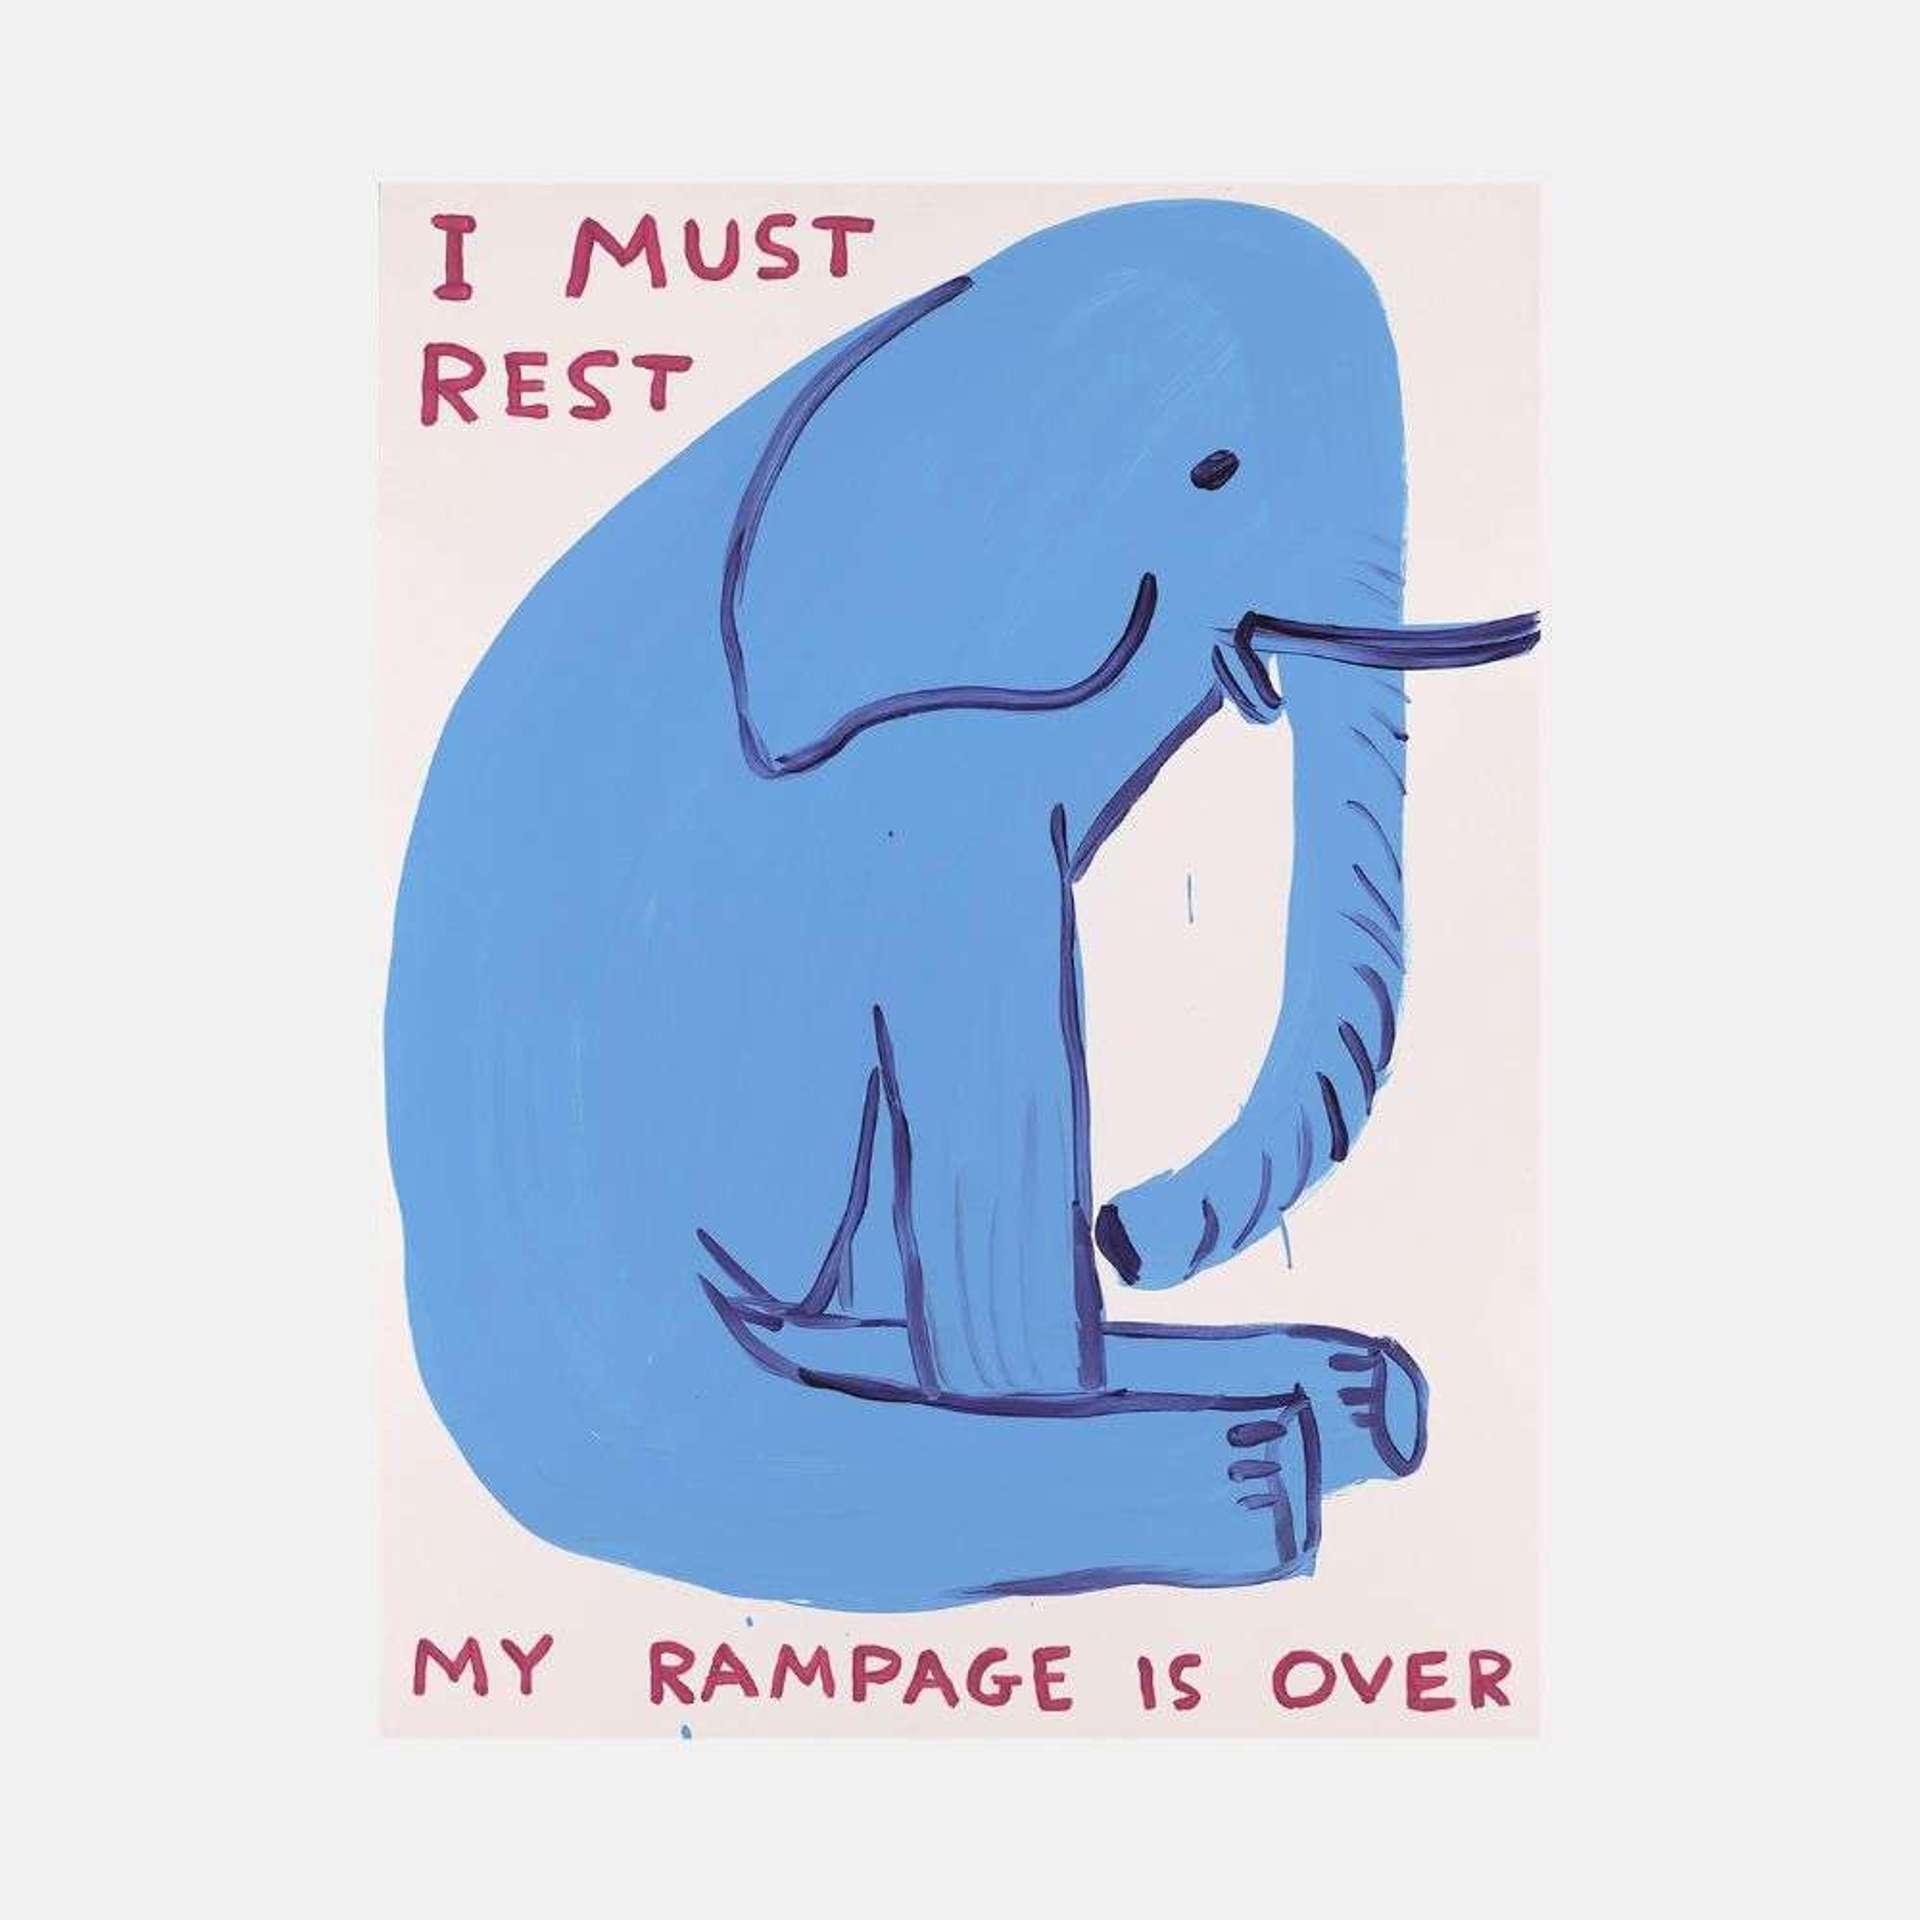 My Rampage Is Over © David Shrigley 2019